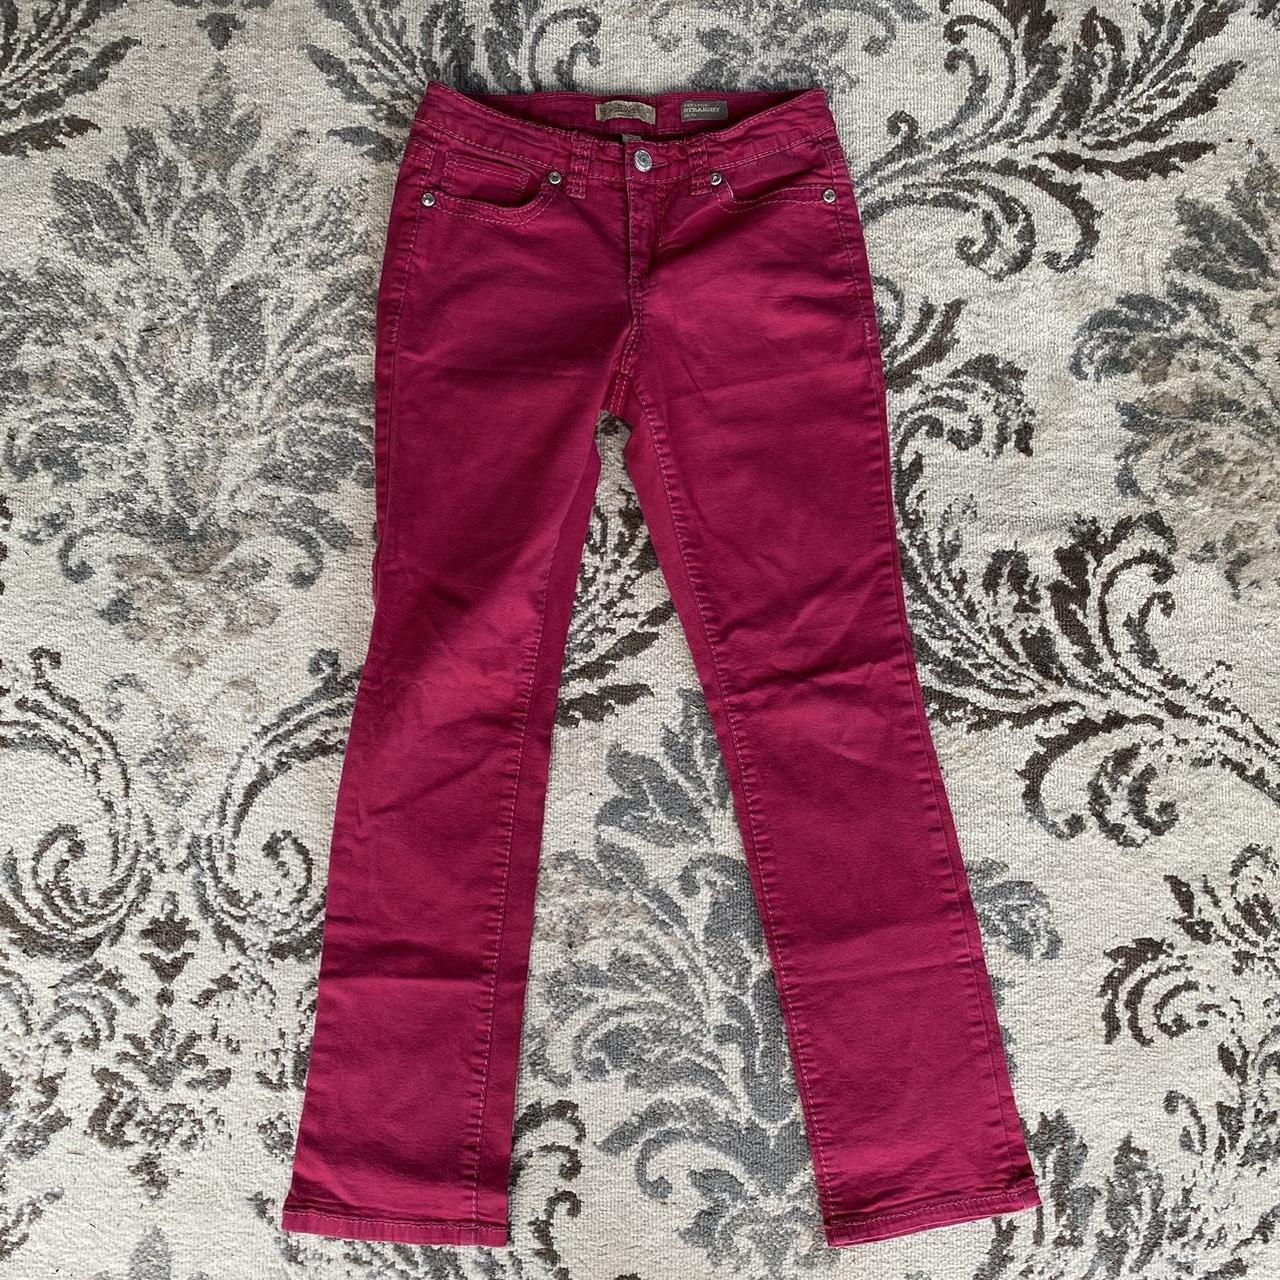 Nine West Women's Pink and Silver Jeans | Depop